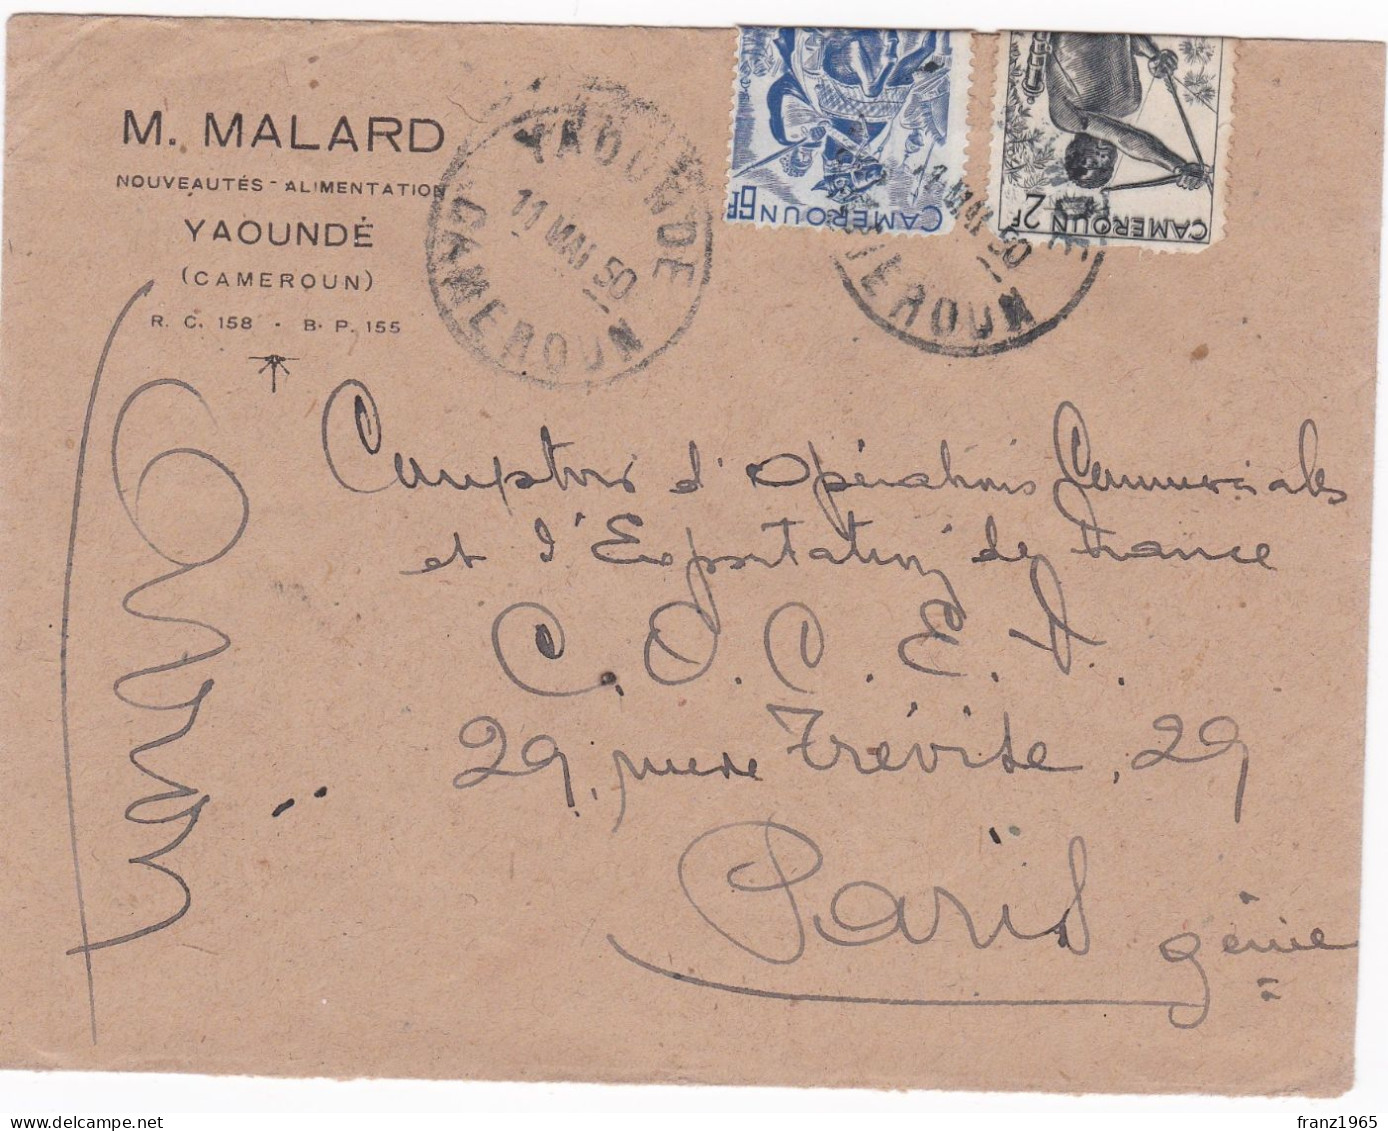 From Camerun To France - 1950 - Luftpost